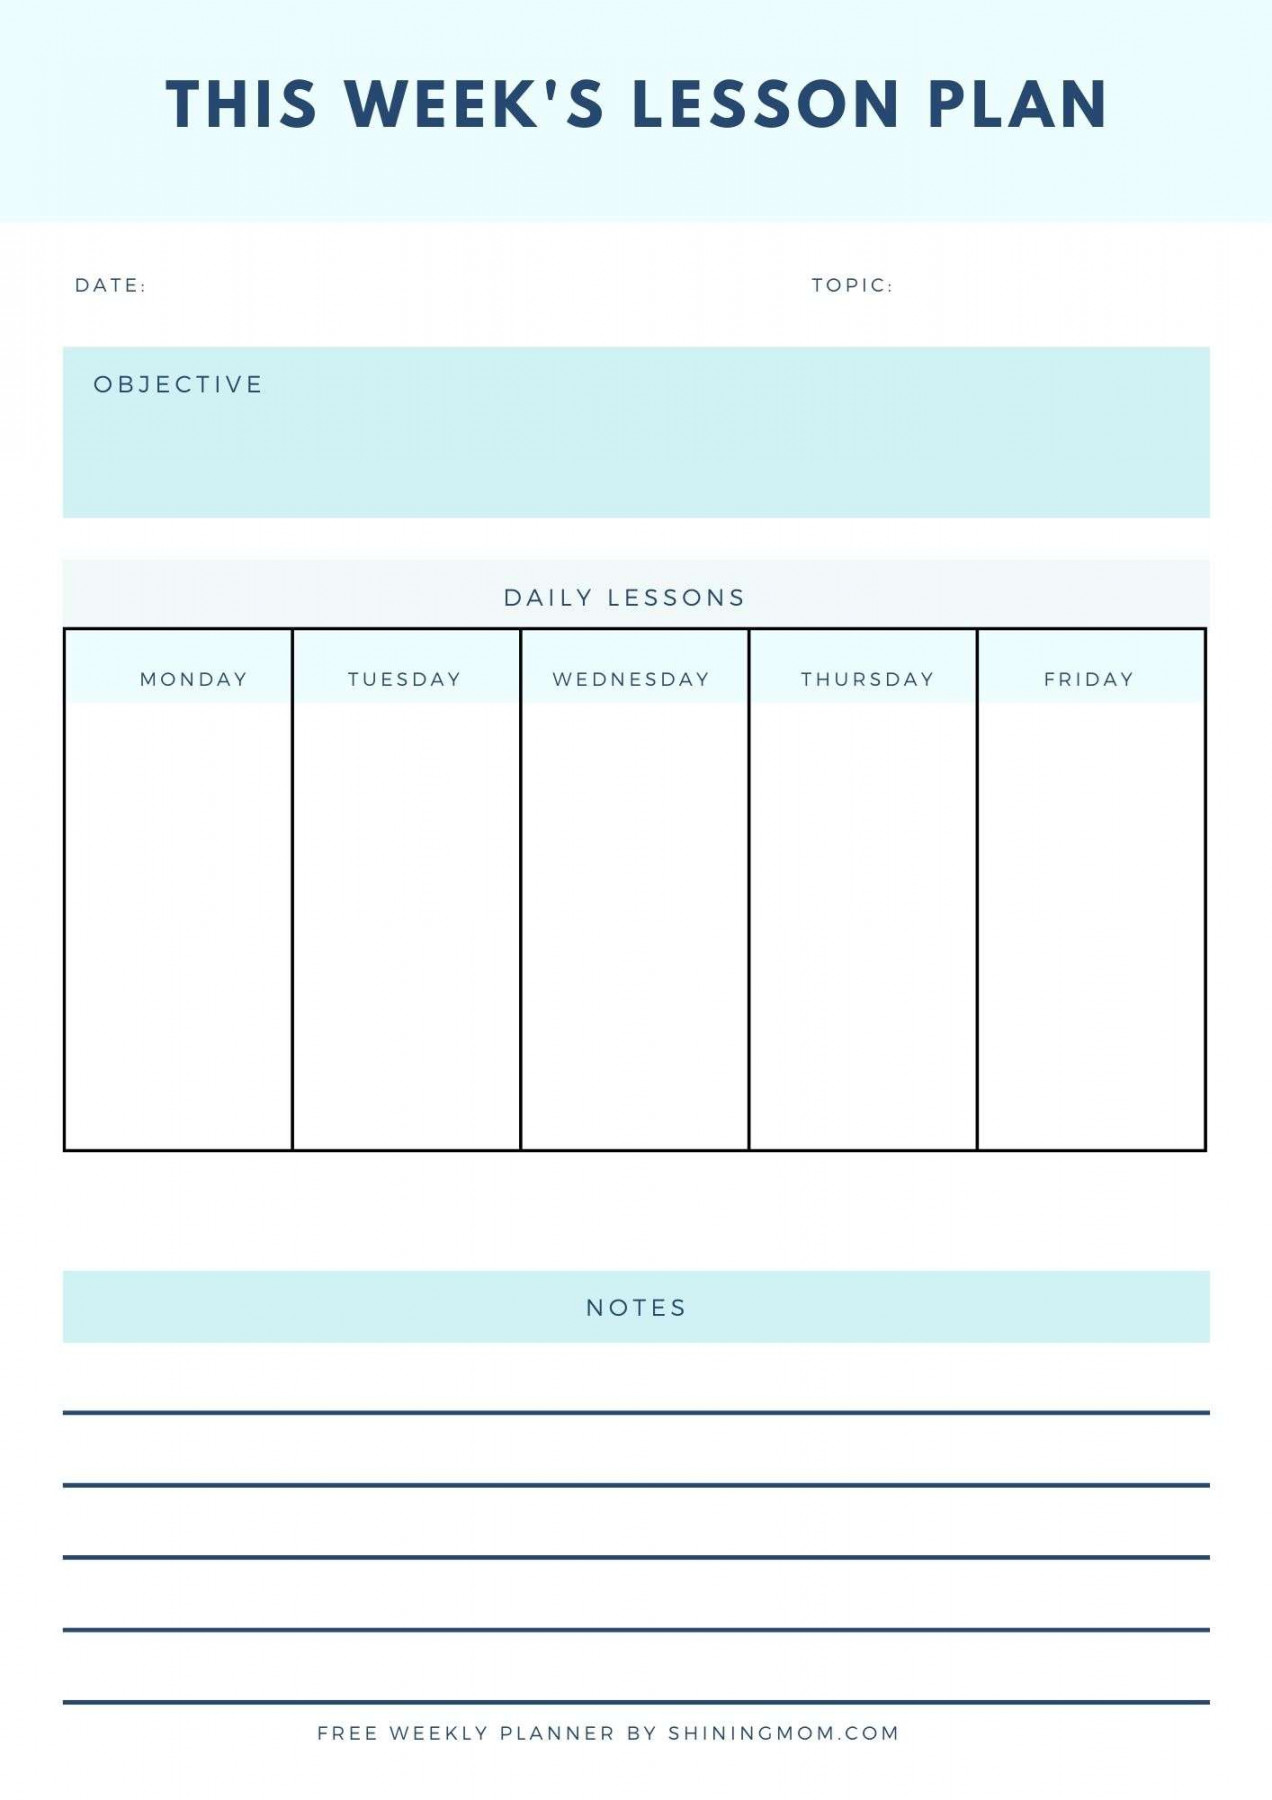 Weekly Lesson Plan Templates:  Best Lesson Planners, Free Download!